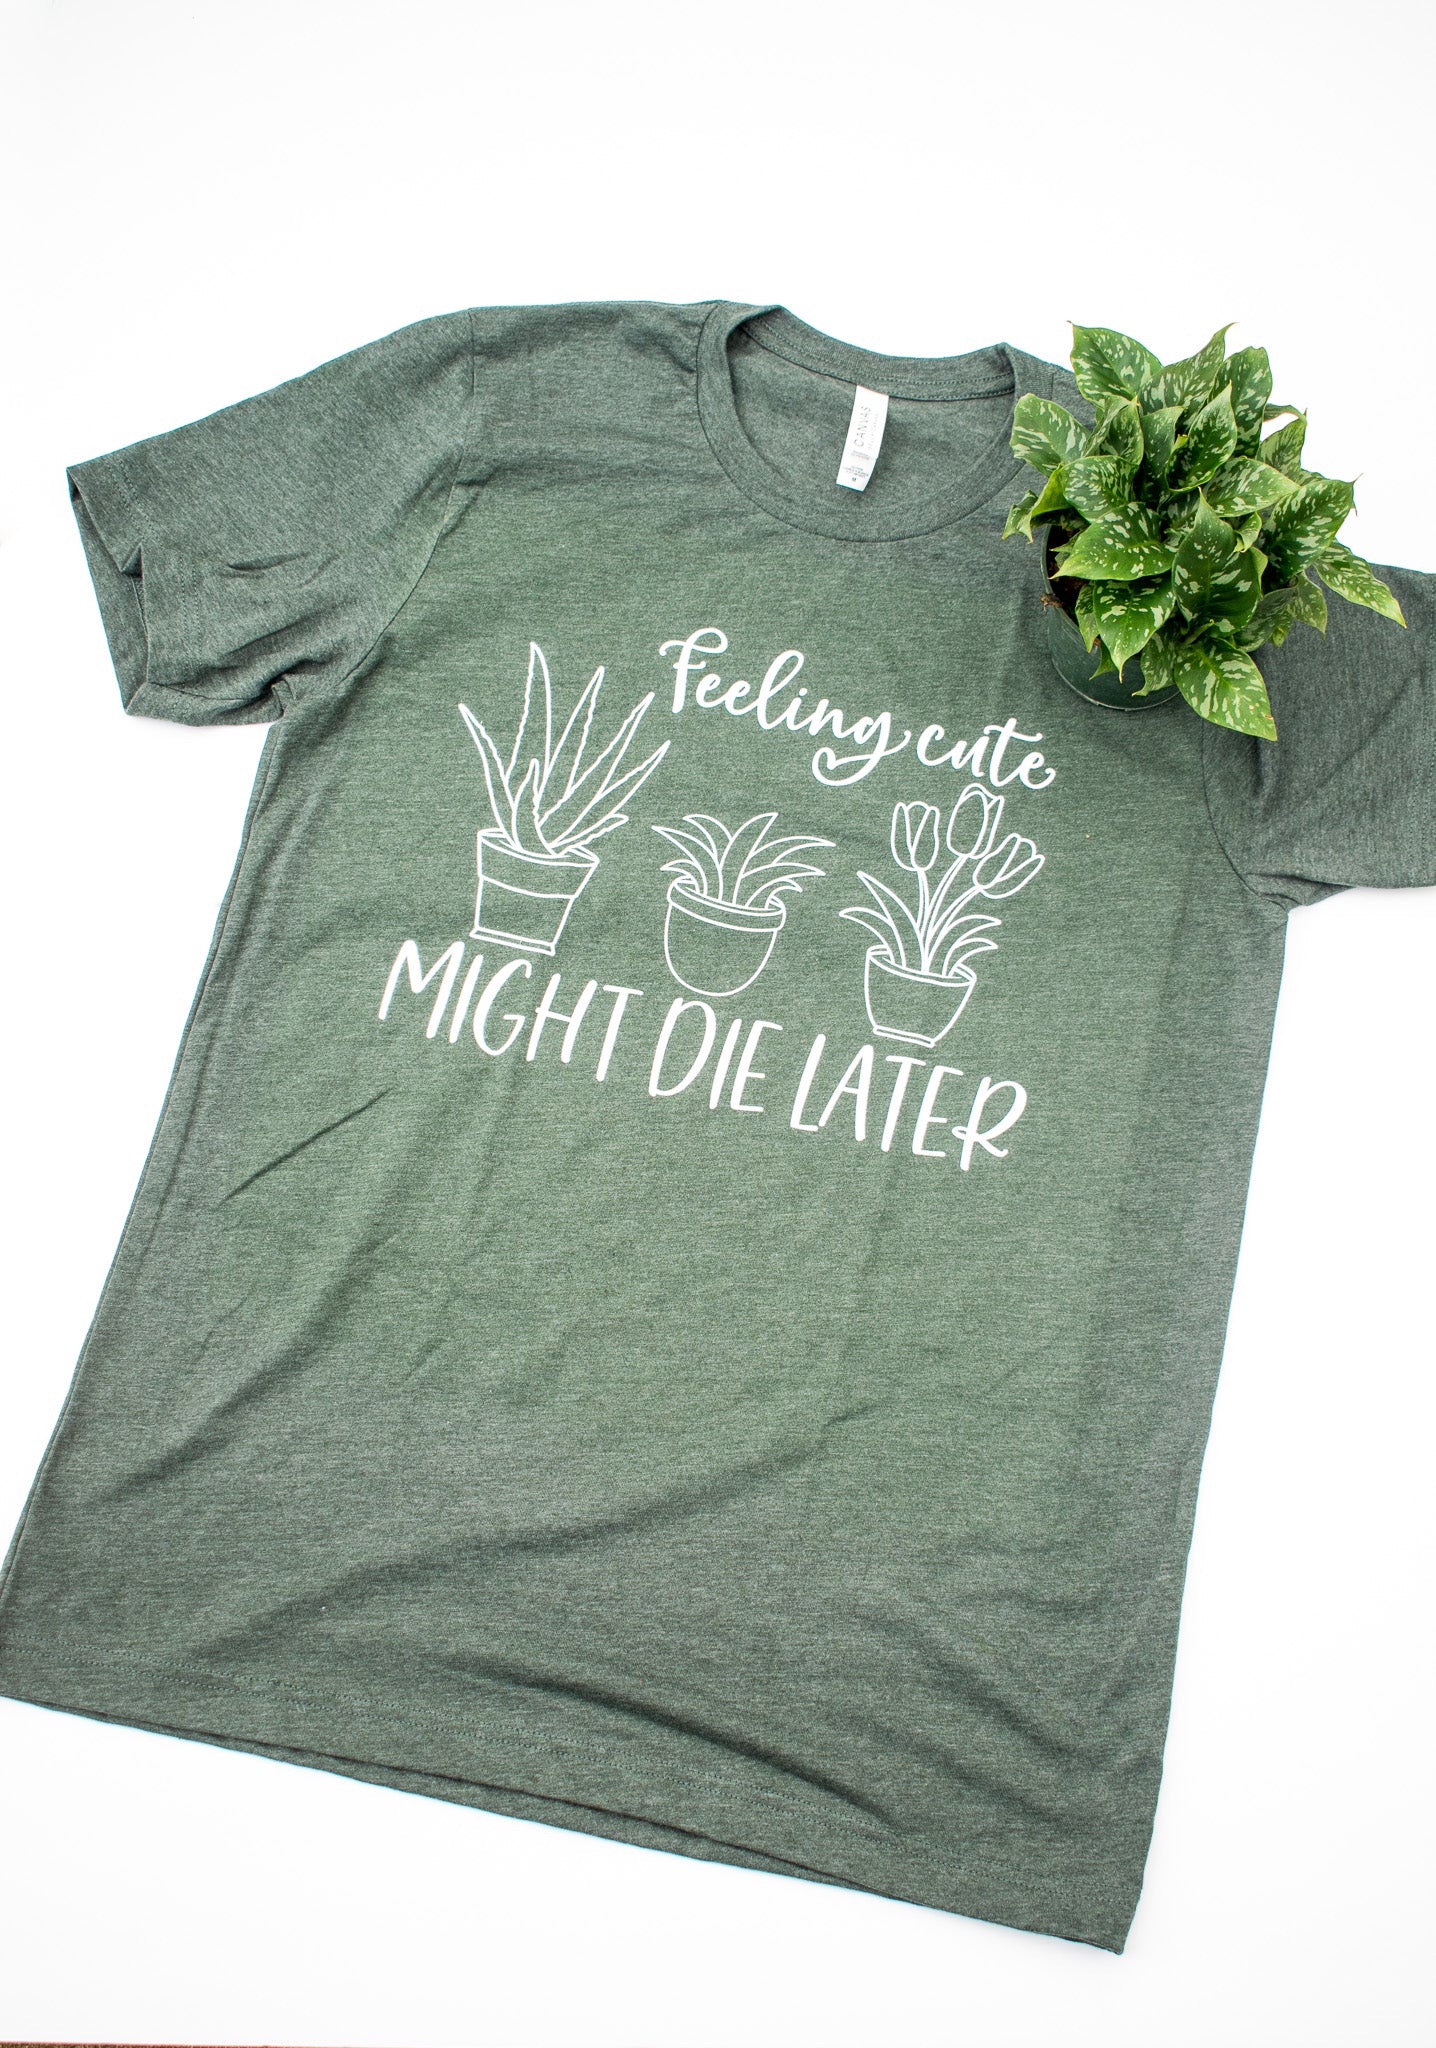 "Feeling cute, might die later" t-shirt